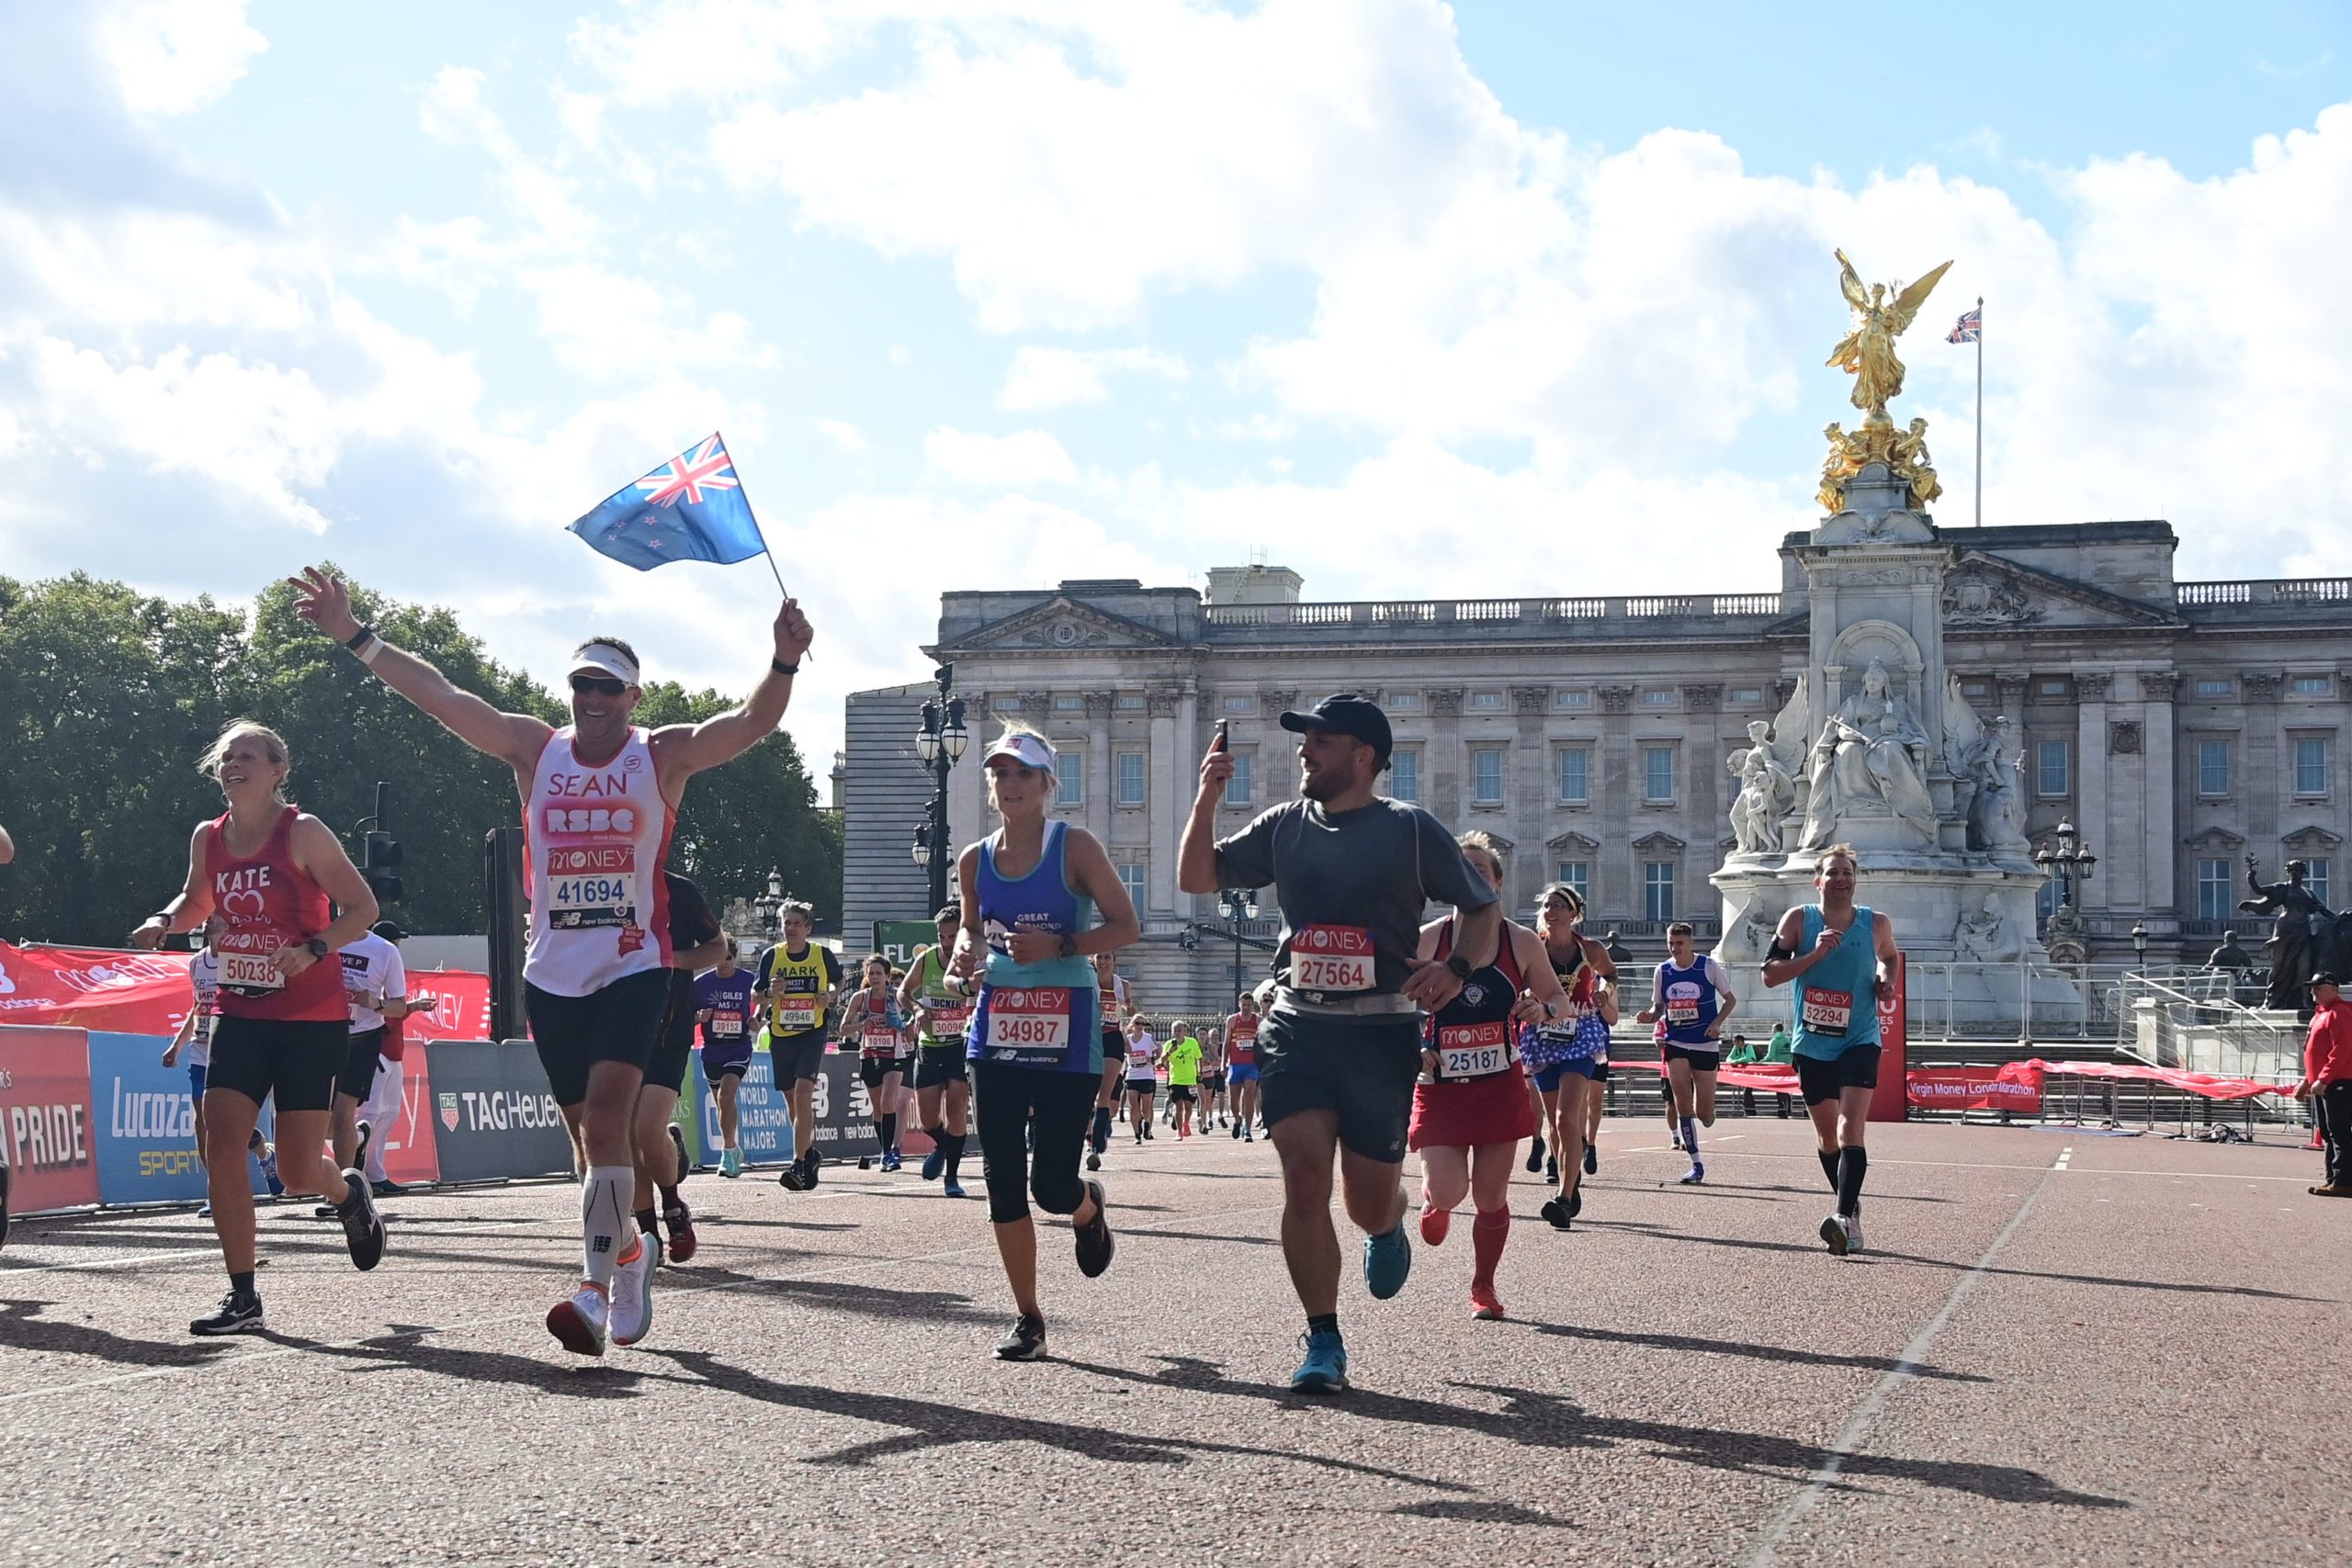 Sean running along the mall at London Marathon with Buckingham palace in the background.